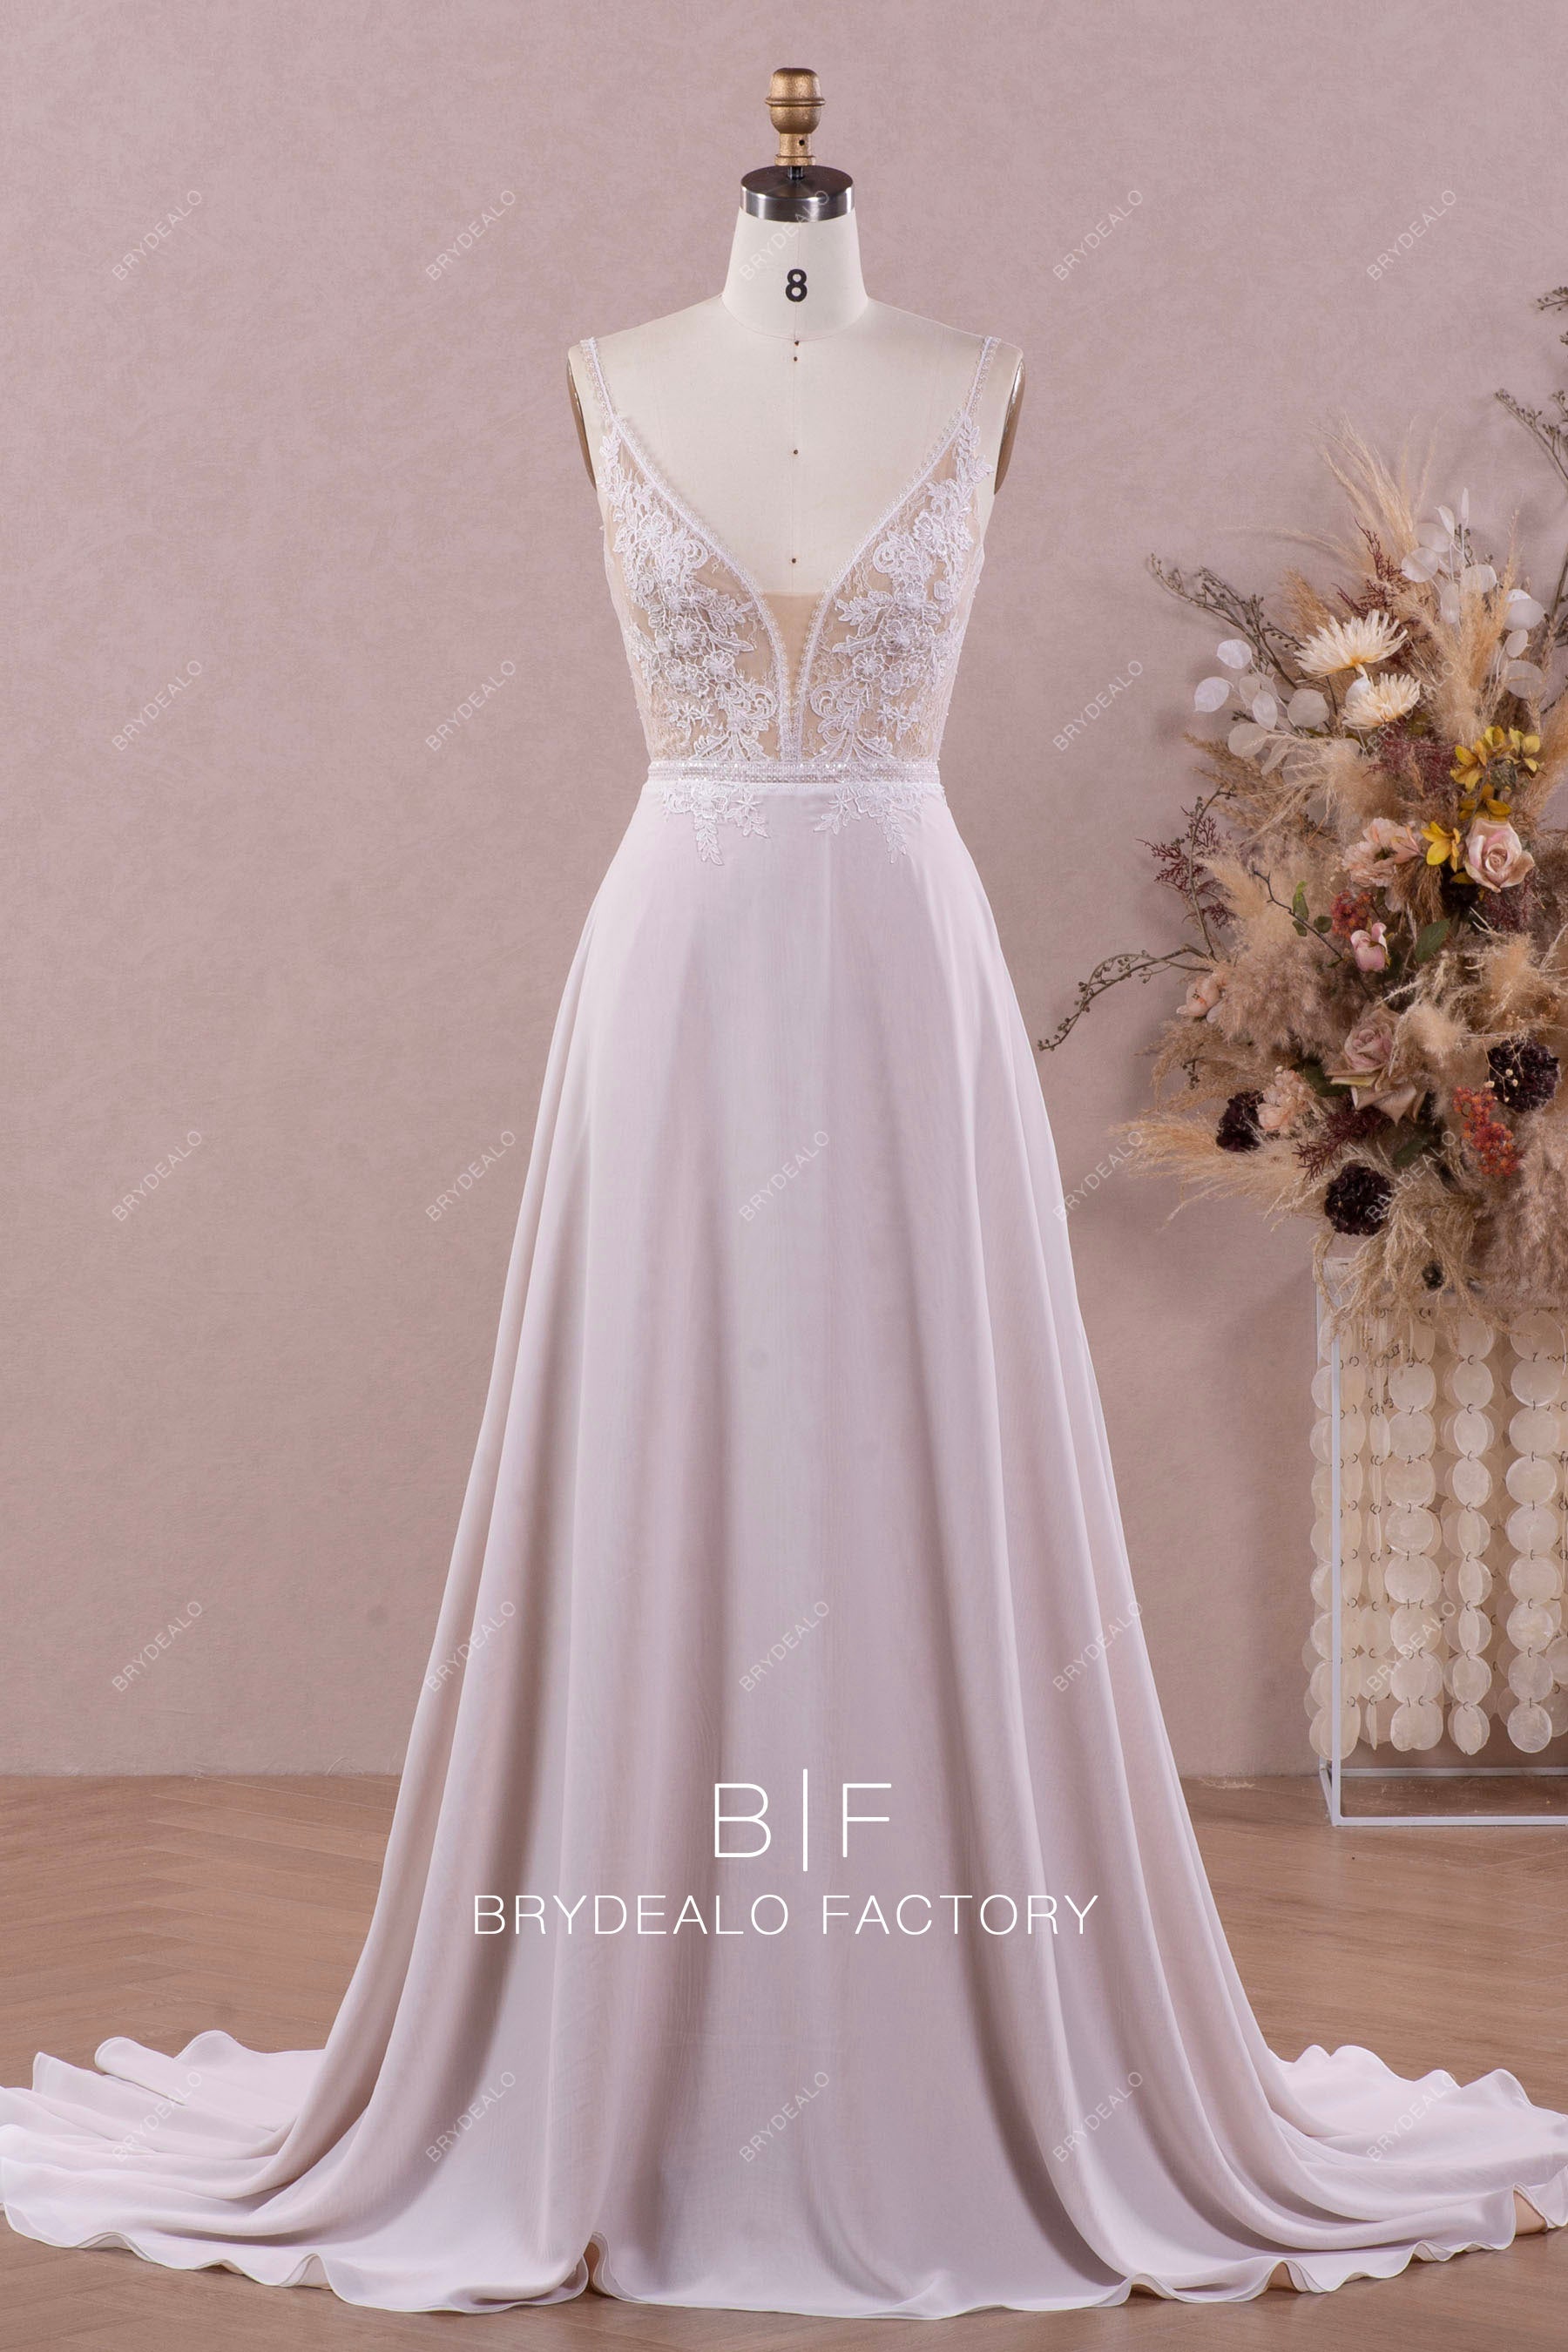 Airy Flower Lace Plunging Chiffon A-line Wedding Dress